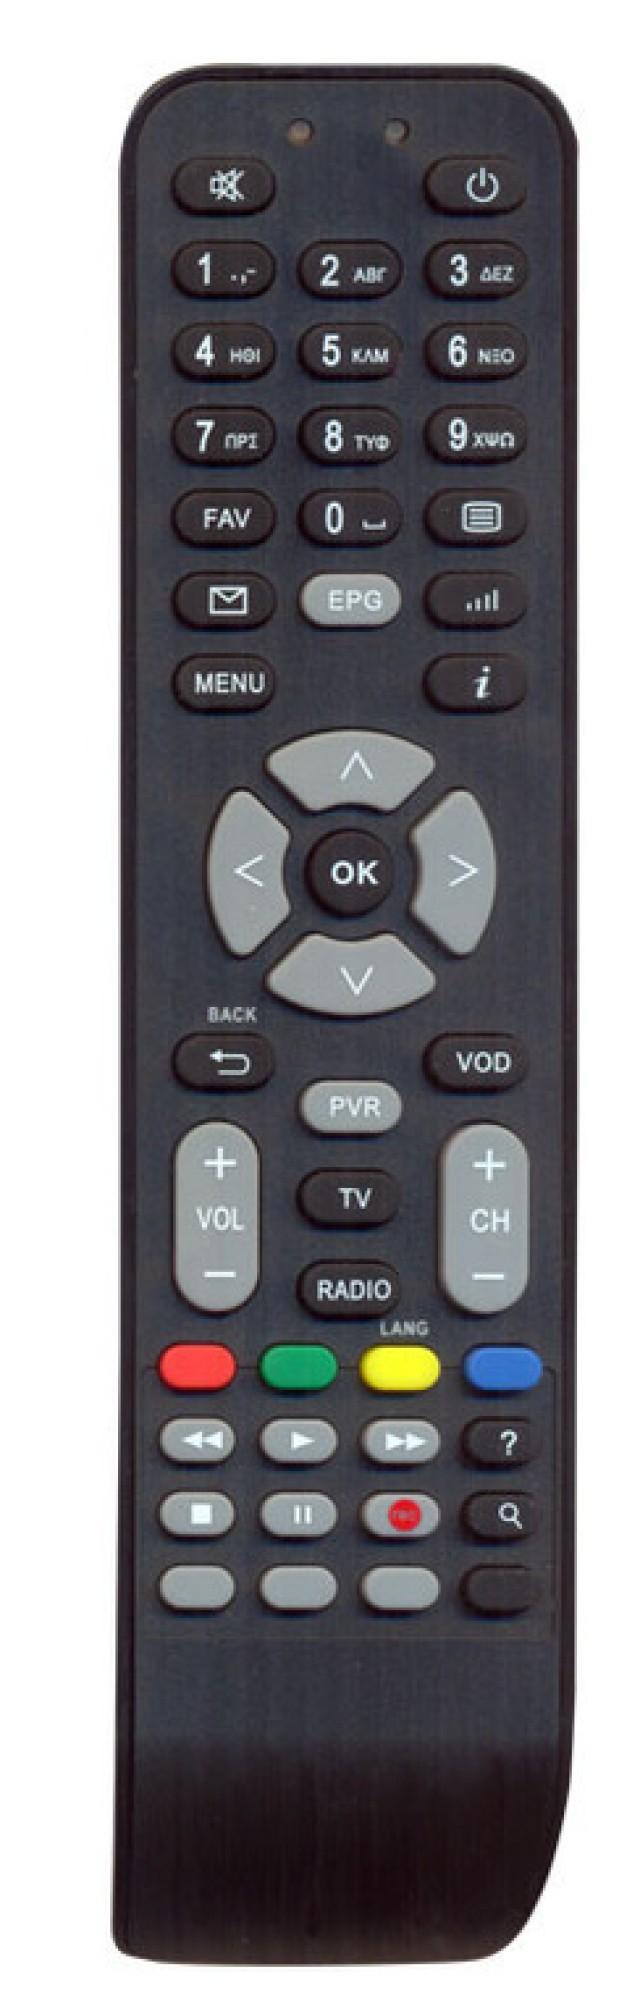 OEM, 0128, Remote control compatible with KAONMEDIA satellite for OTE TV